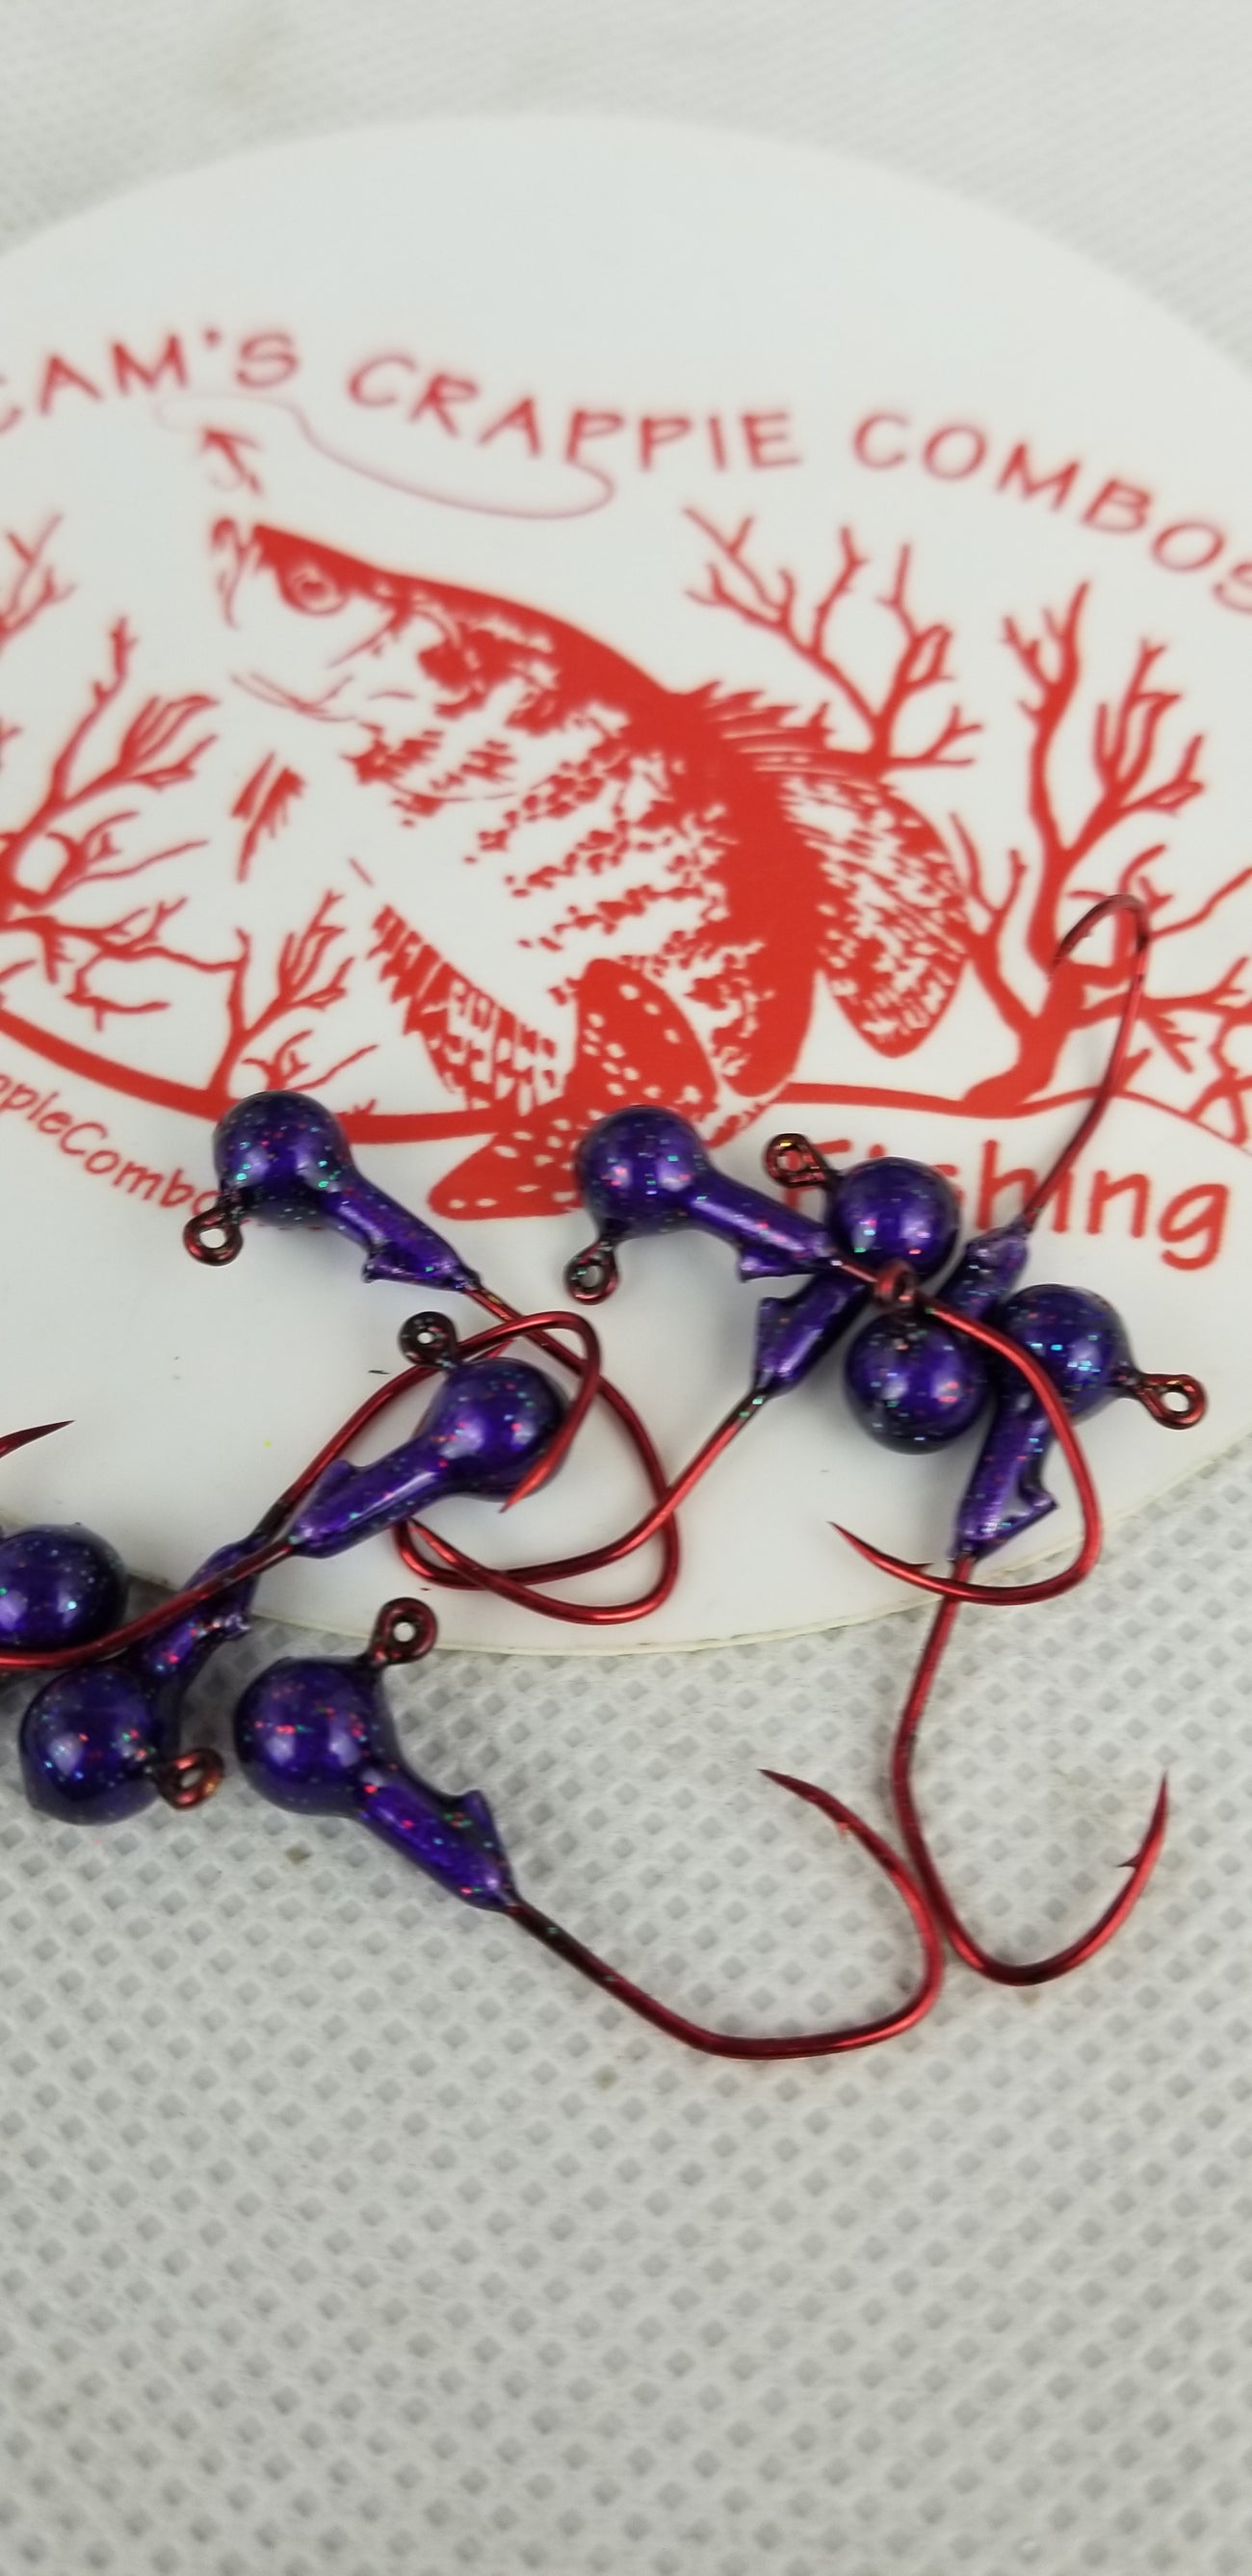 40 pk. 1/32 oz. Cam's "PURPLE PASSION" Painted jigs with Collar and #2 Red Chrome "NASTY BEND HOOK"